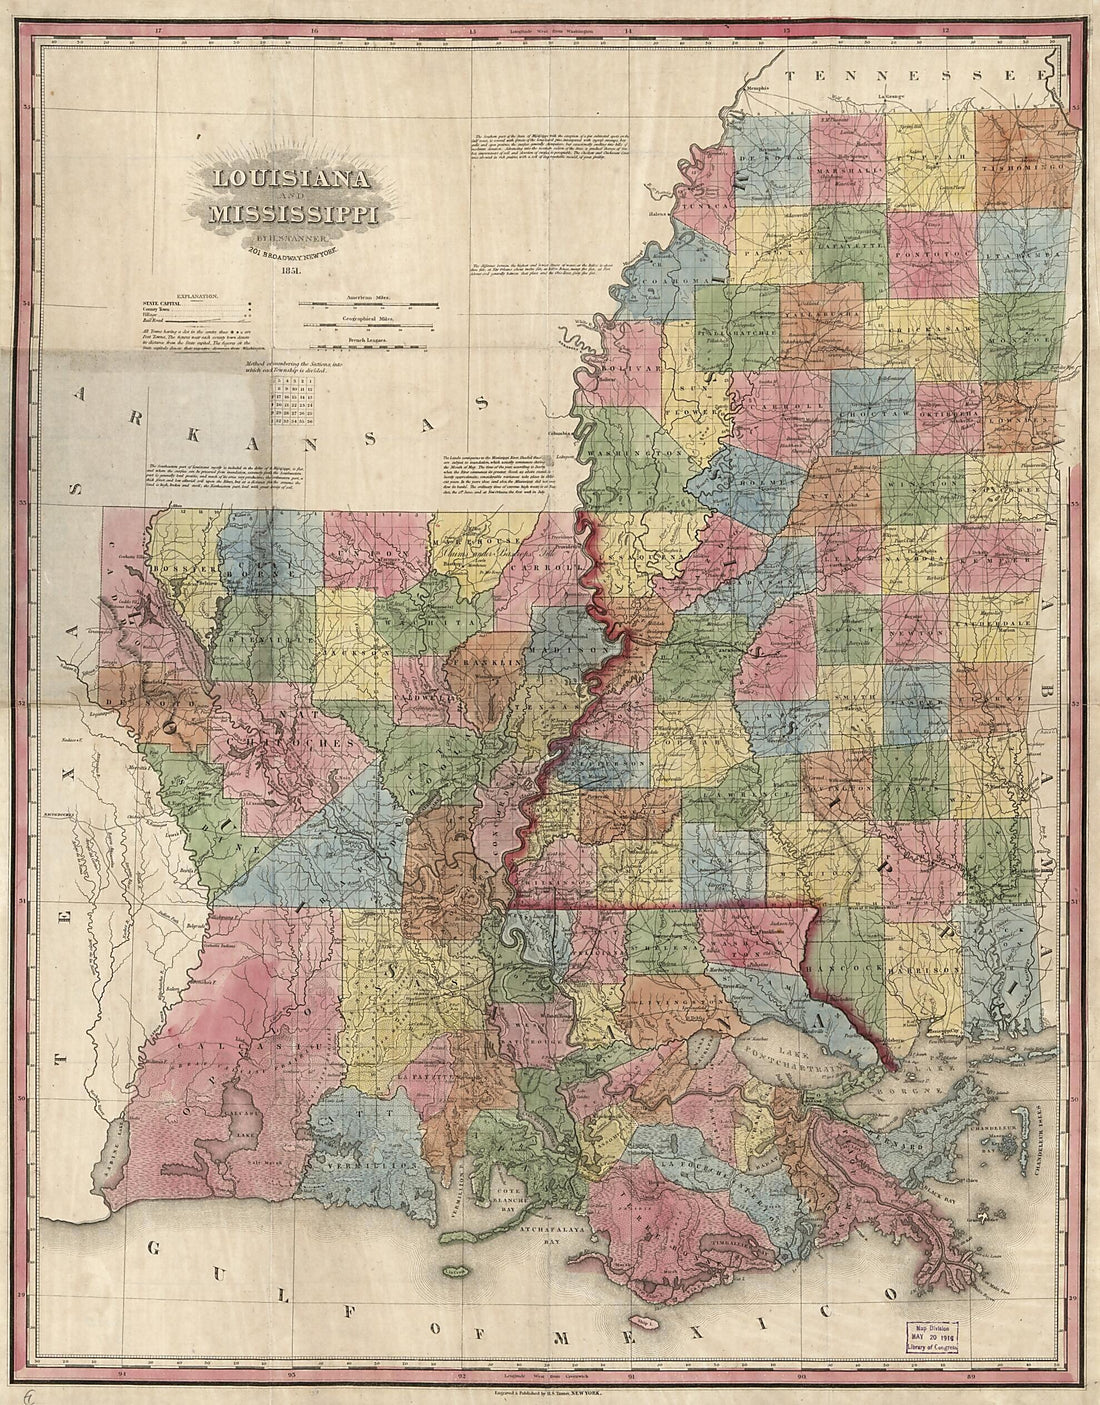 This old map of Louisiana and Mississippi from 1851 was created by Millard Fillmore, Henry Schenck Tanner in 1851